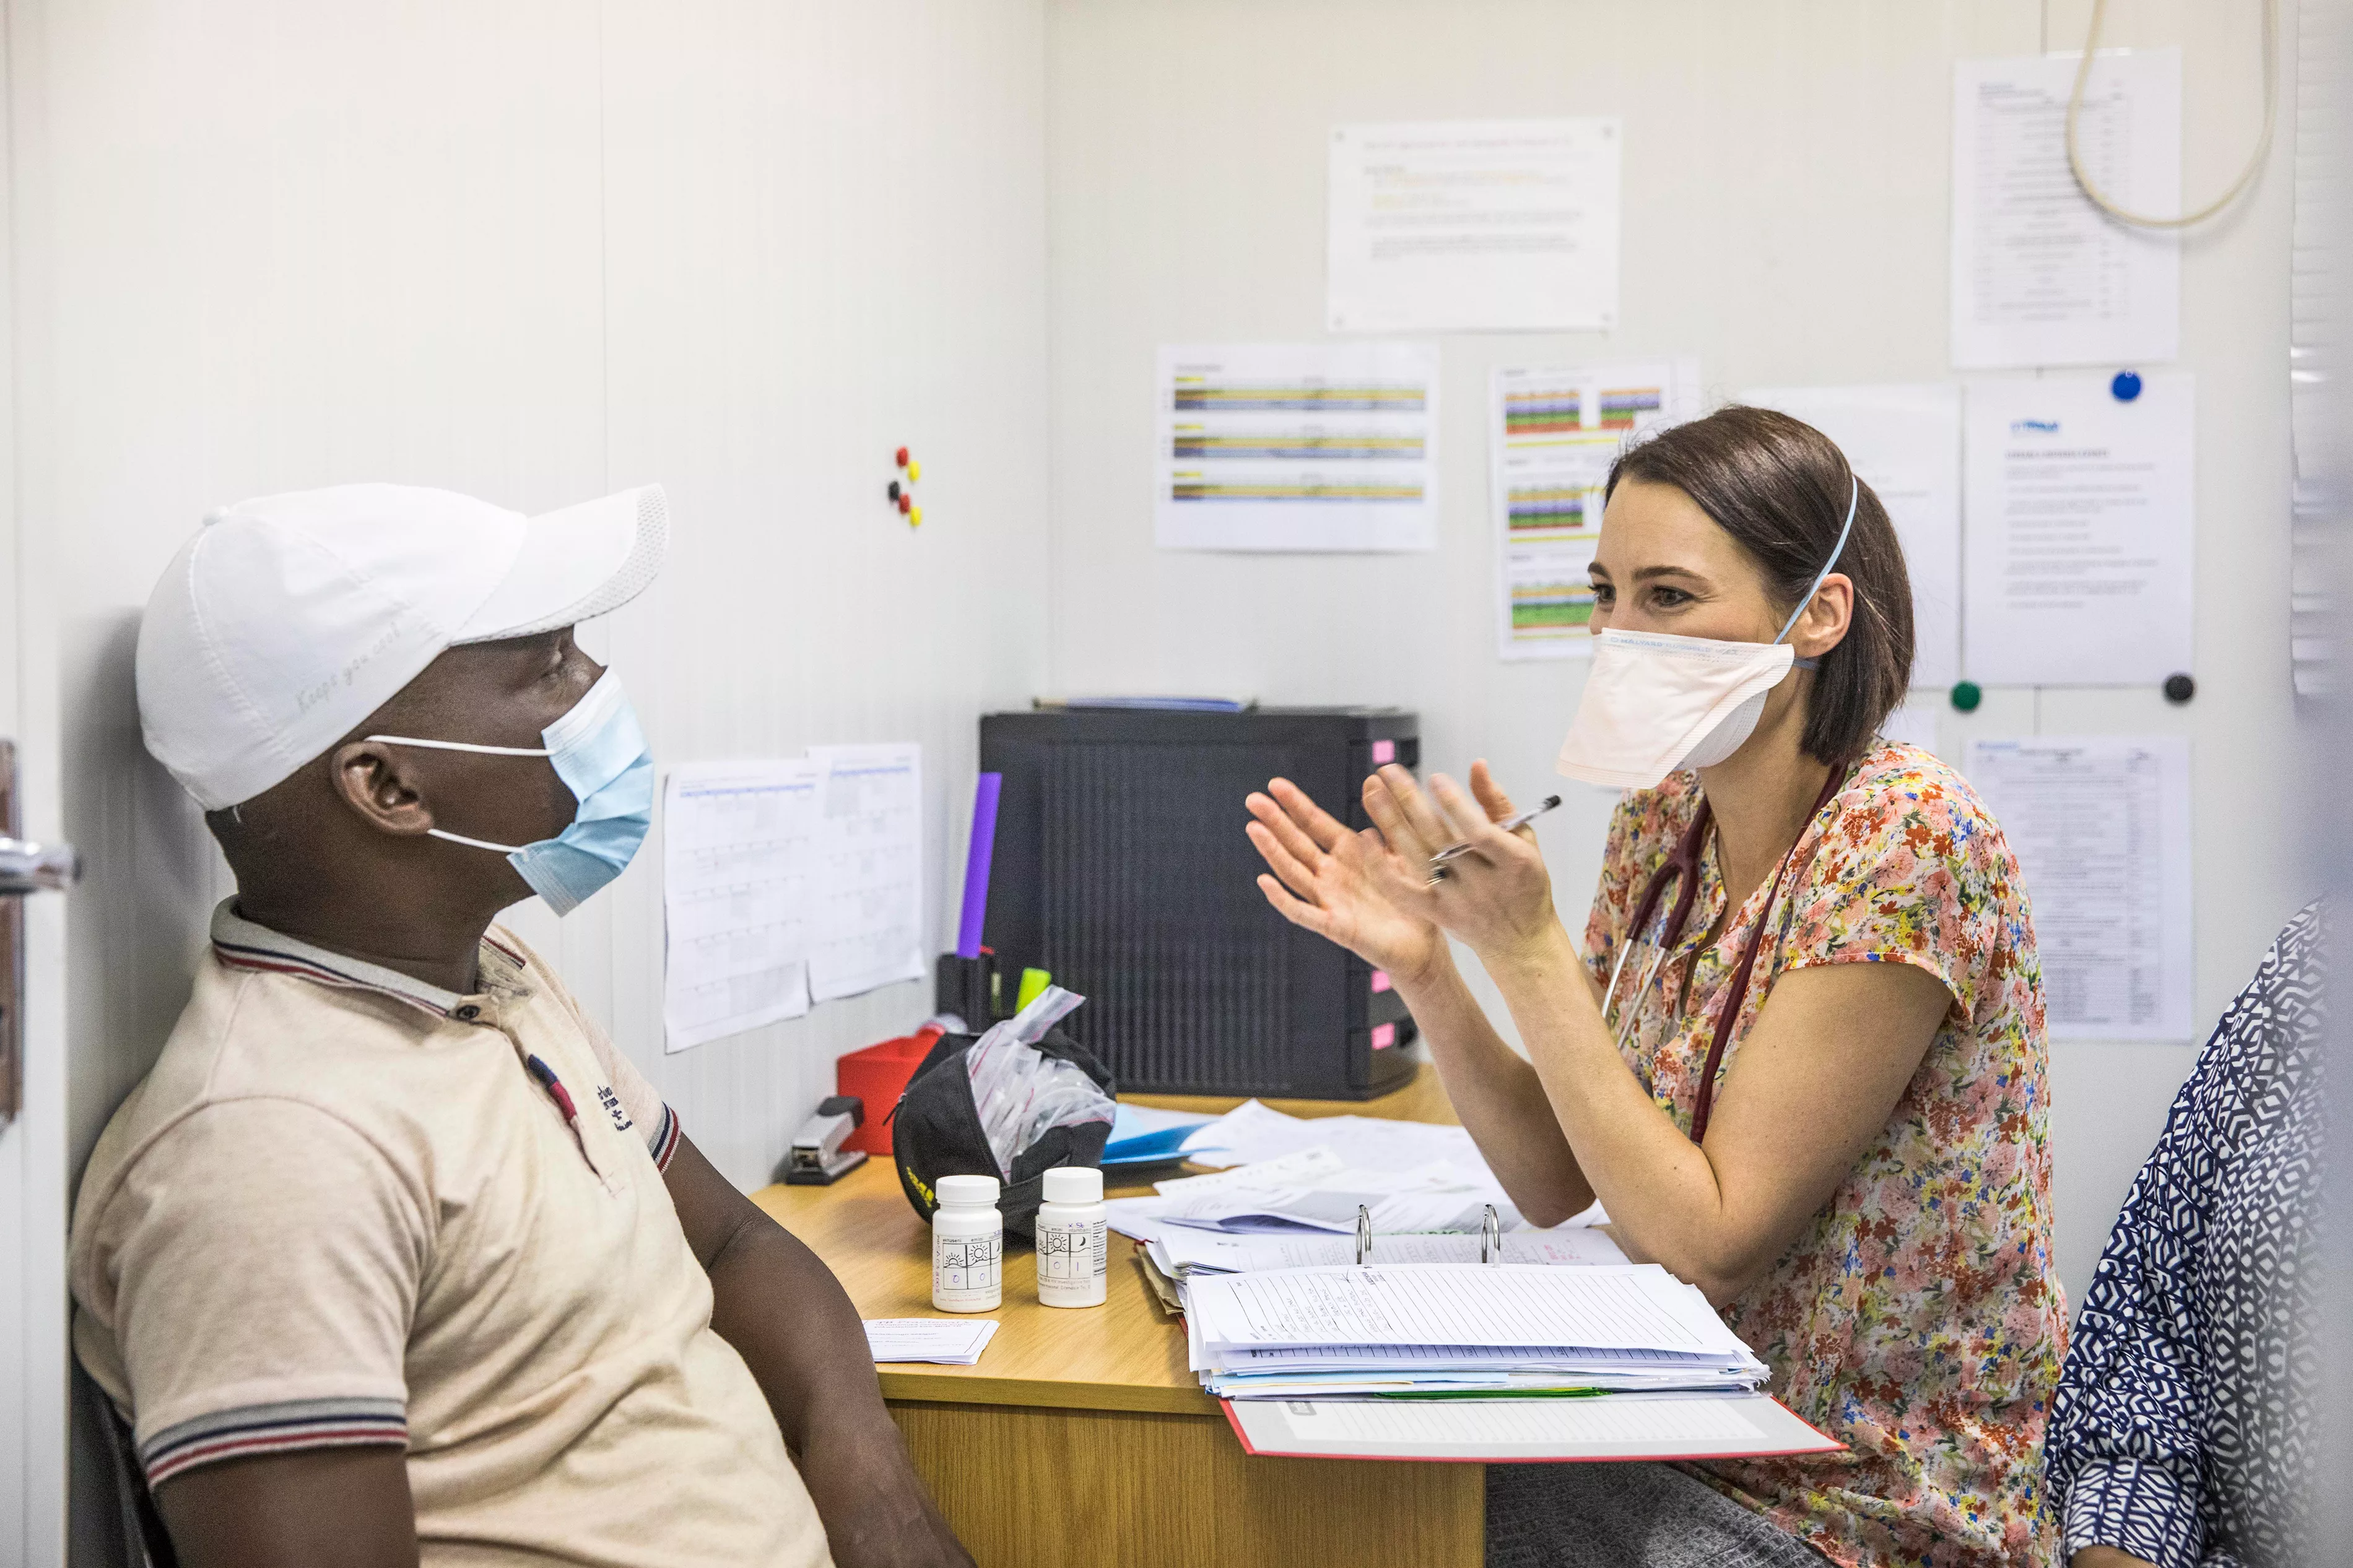 Dr Louisa Dunn, a sub-investigator on the TB Practecal clinical trial consults with a patient